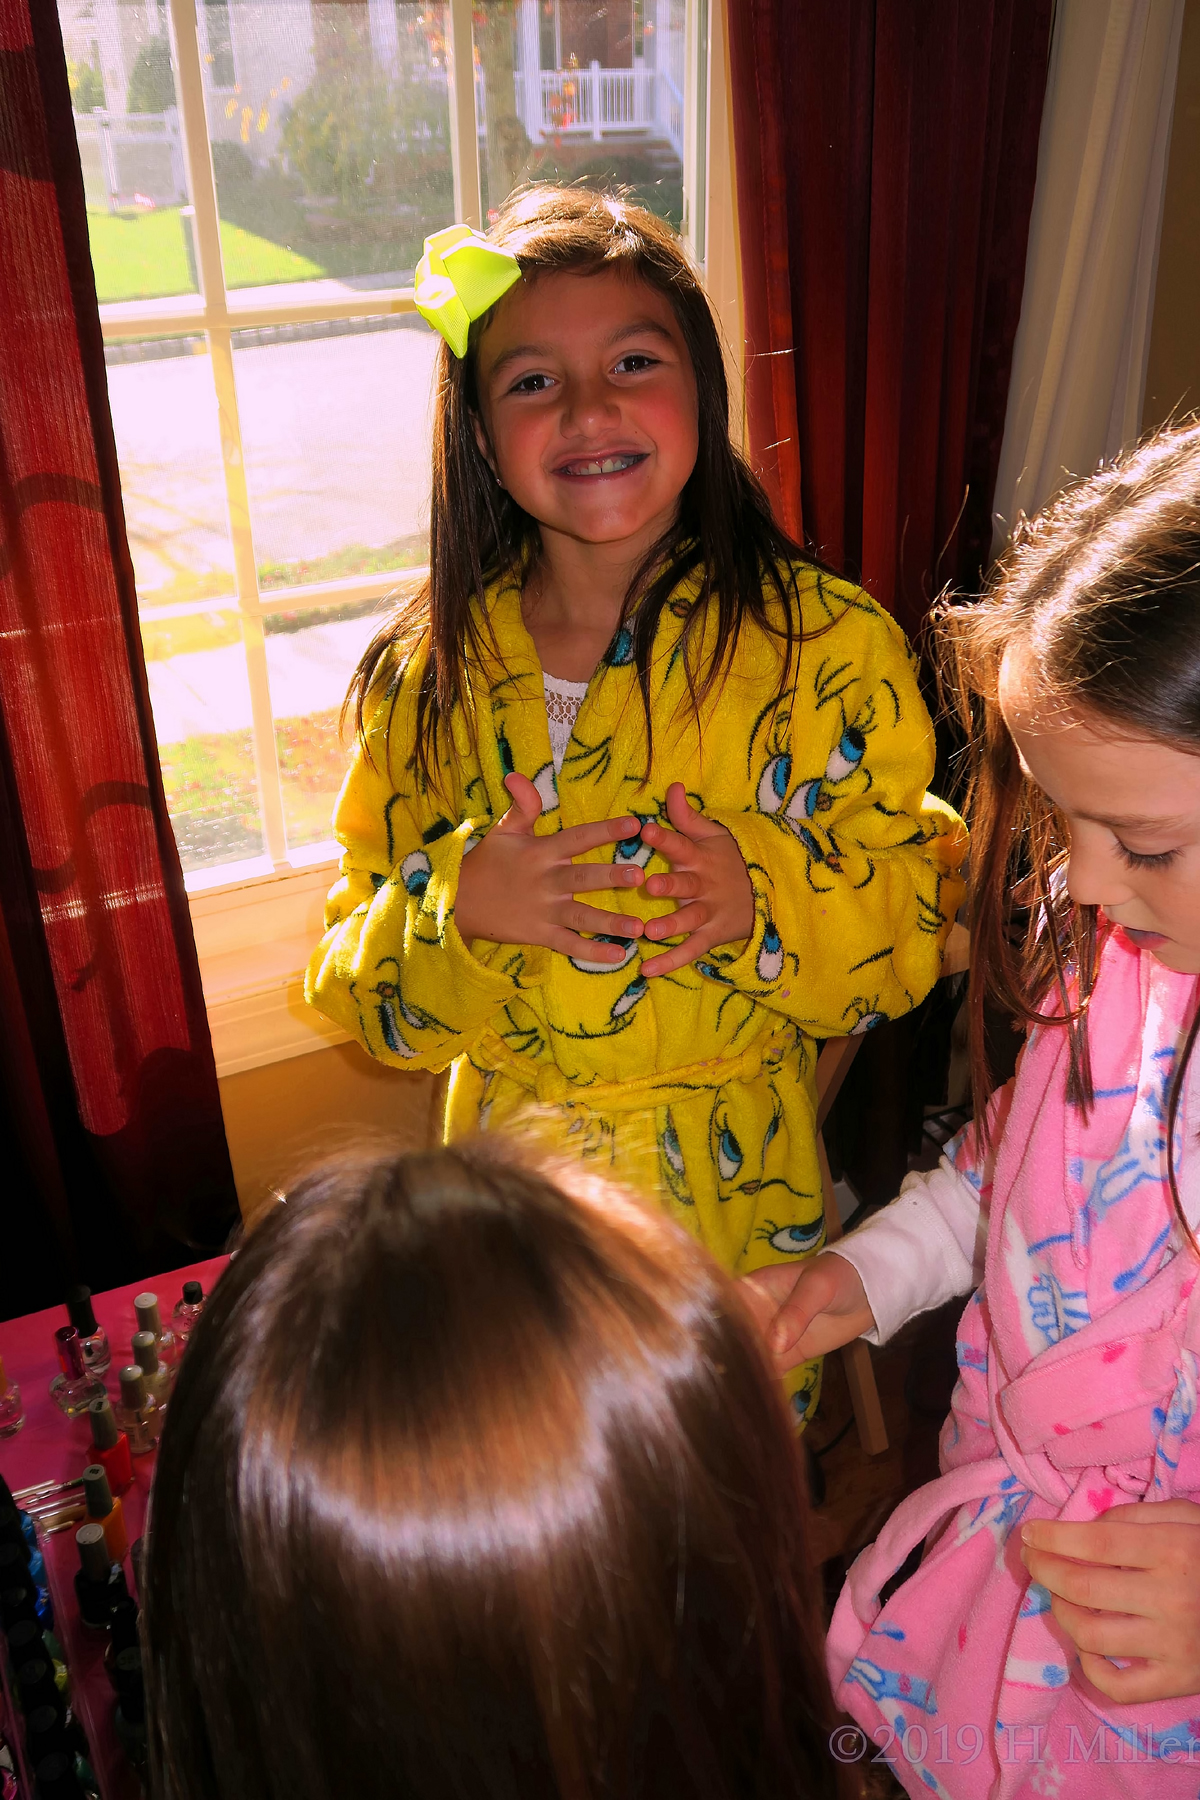 She's Got Sunshine! Kids Party Guest Poses By Window In Yellow Spa Robe! 1